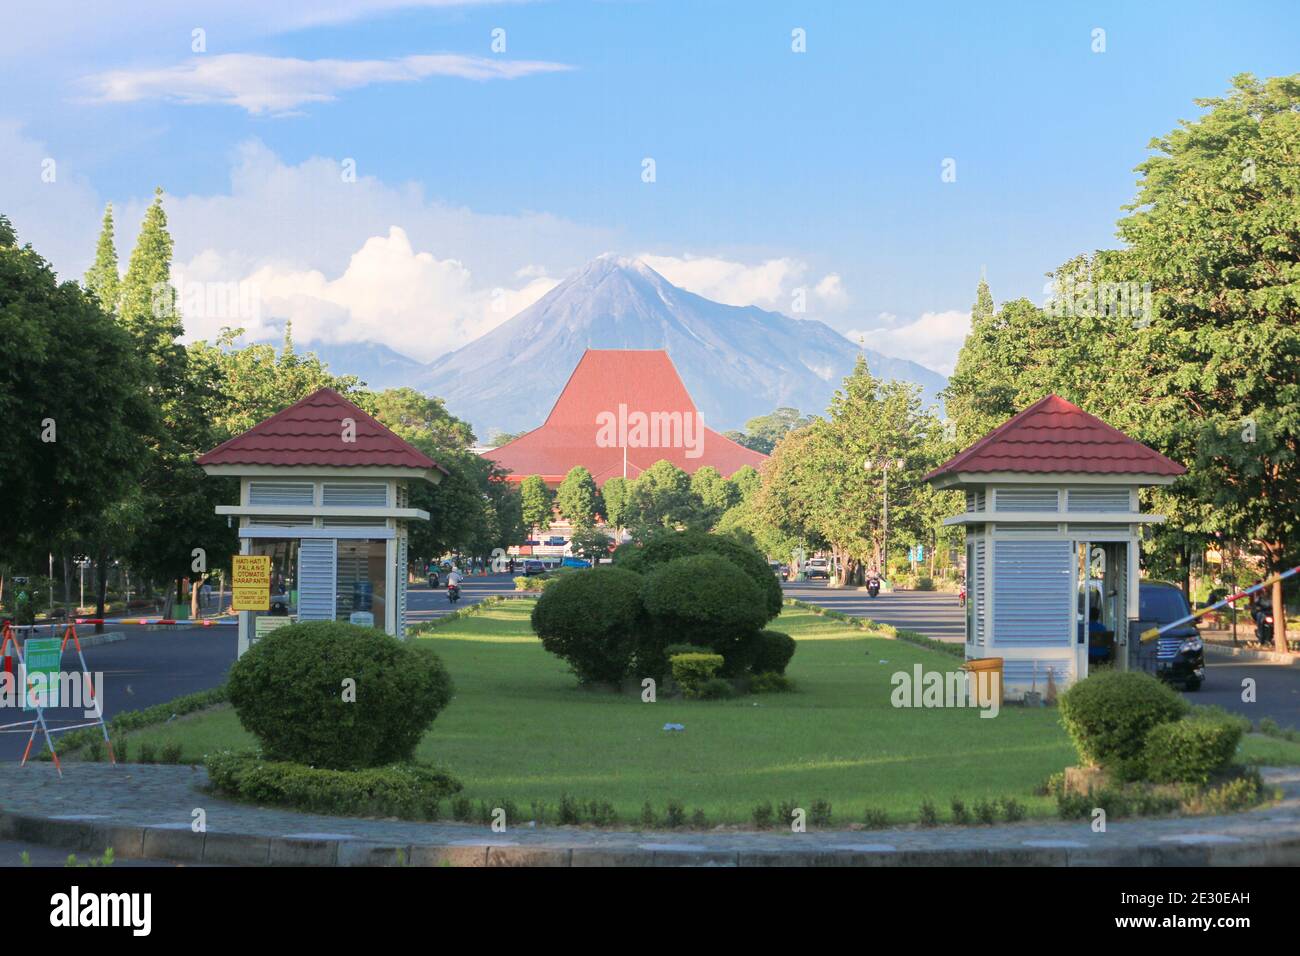 Yogyakarta, Indonesia - March 1, 2020: Gadjah Mada University front gate with Merapi mountain in the background. Stock Photo